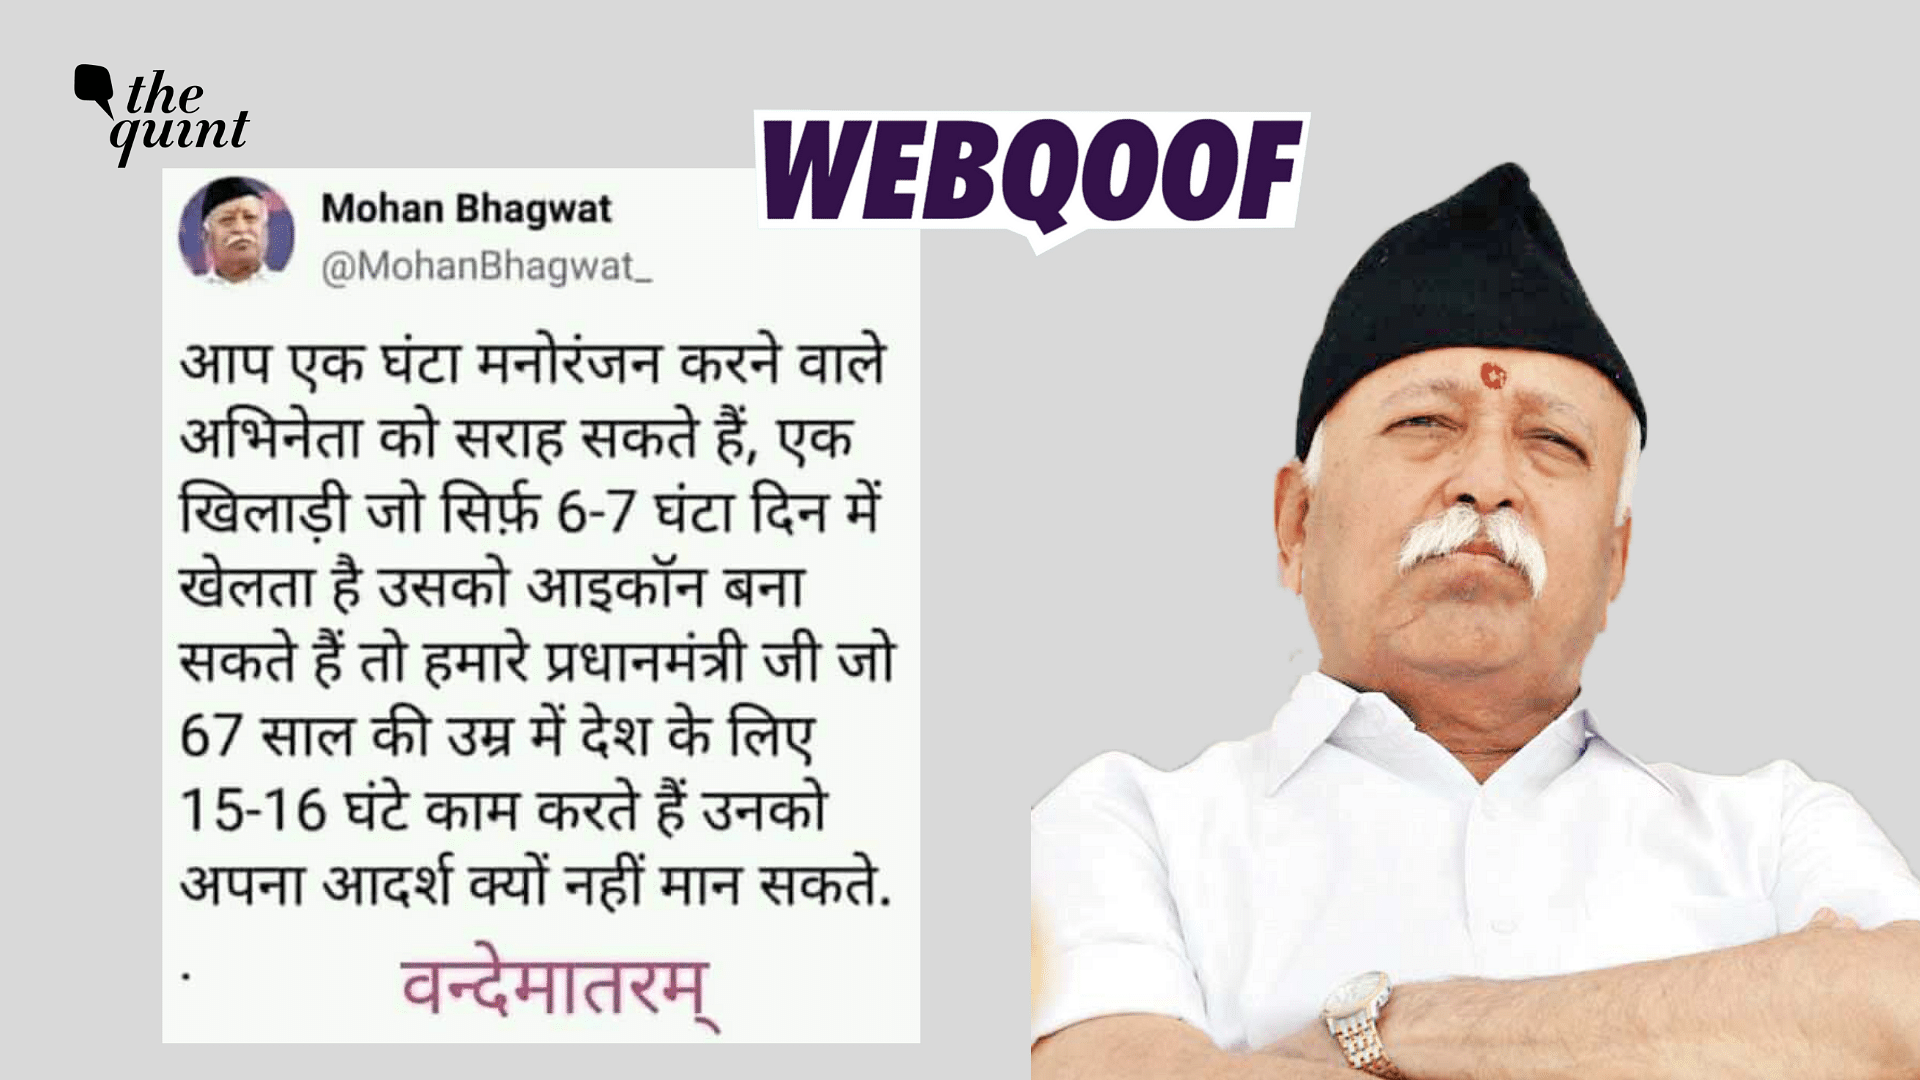 <div class="paragraphs"><p>Fact-Check: Mohan Bhagwat did not tweet anything related to PM Modi's working hours on Twitter.</p></div>